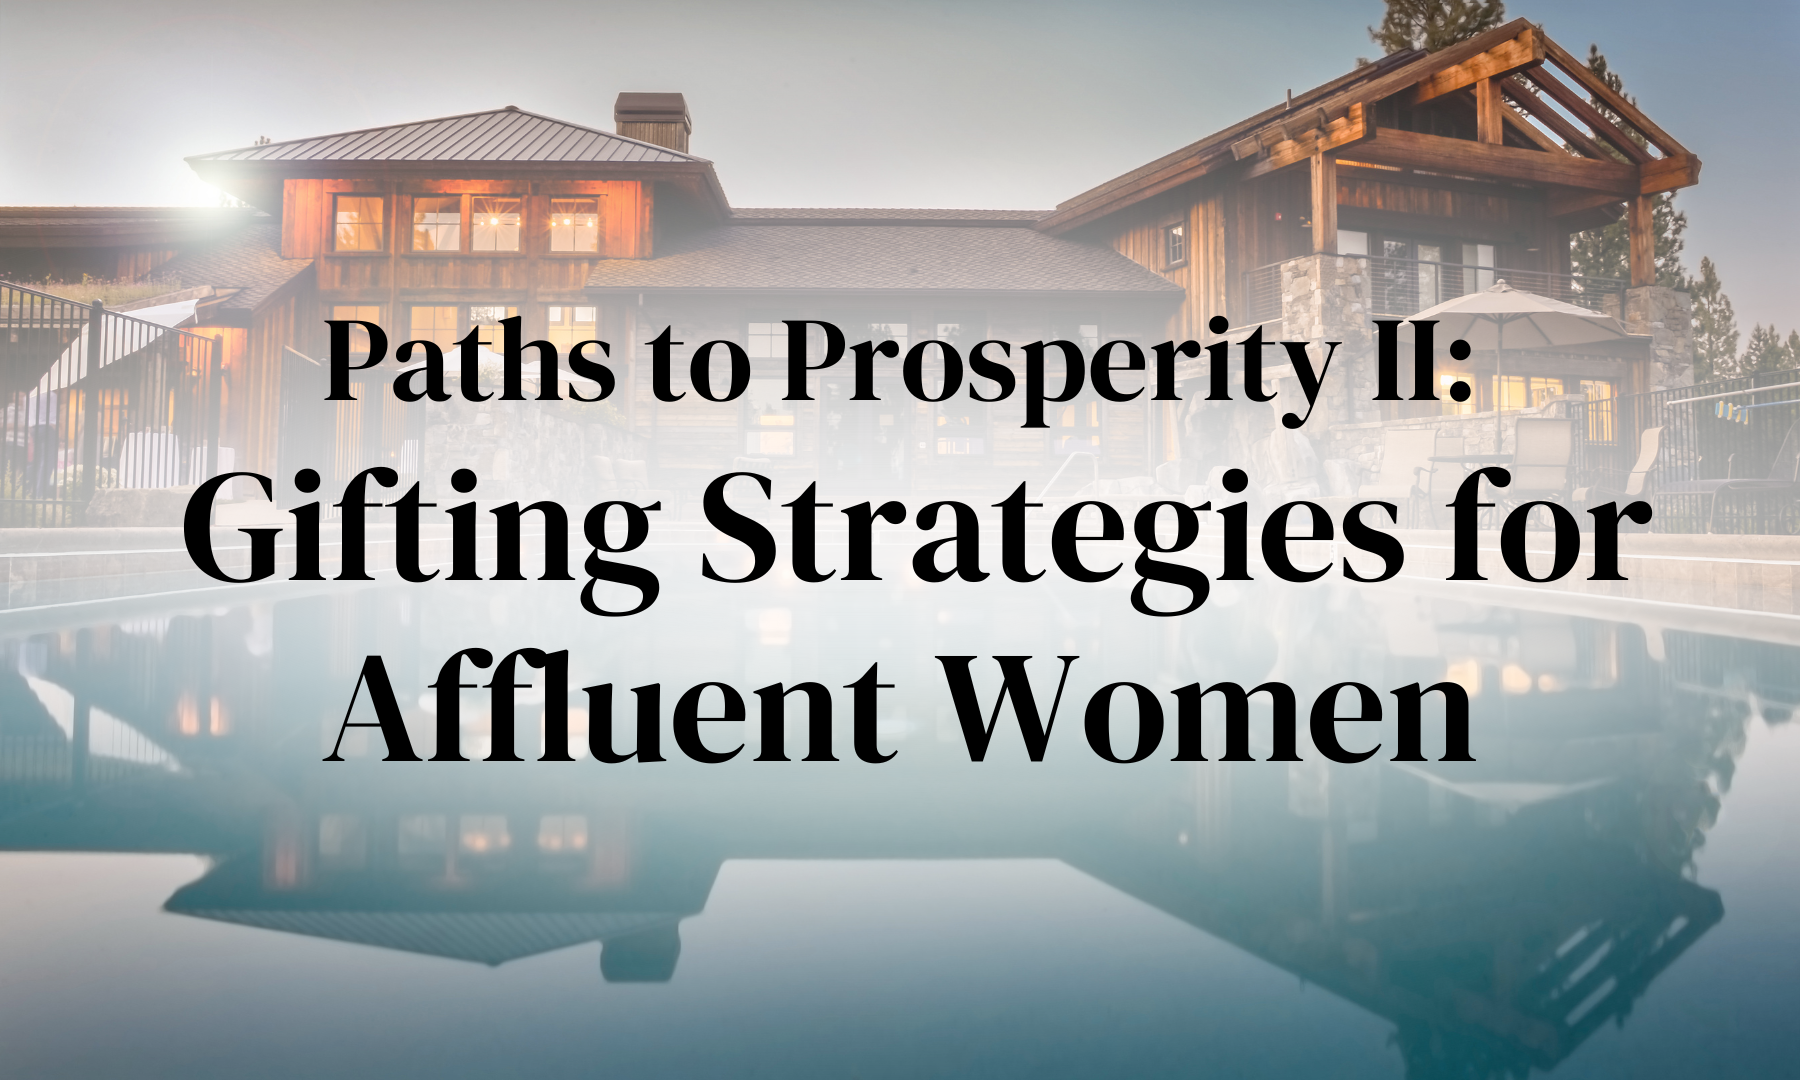 A Path to Prosperity II: Gifting Strategies for Affluent Women